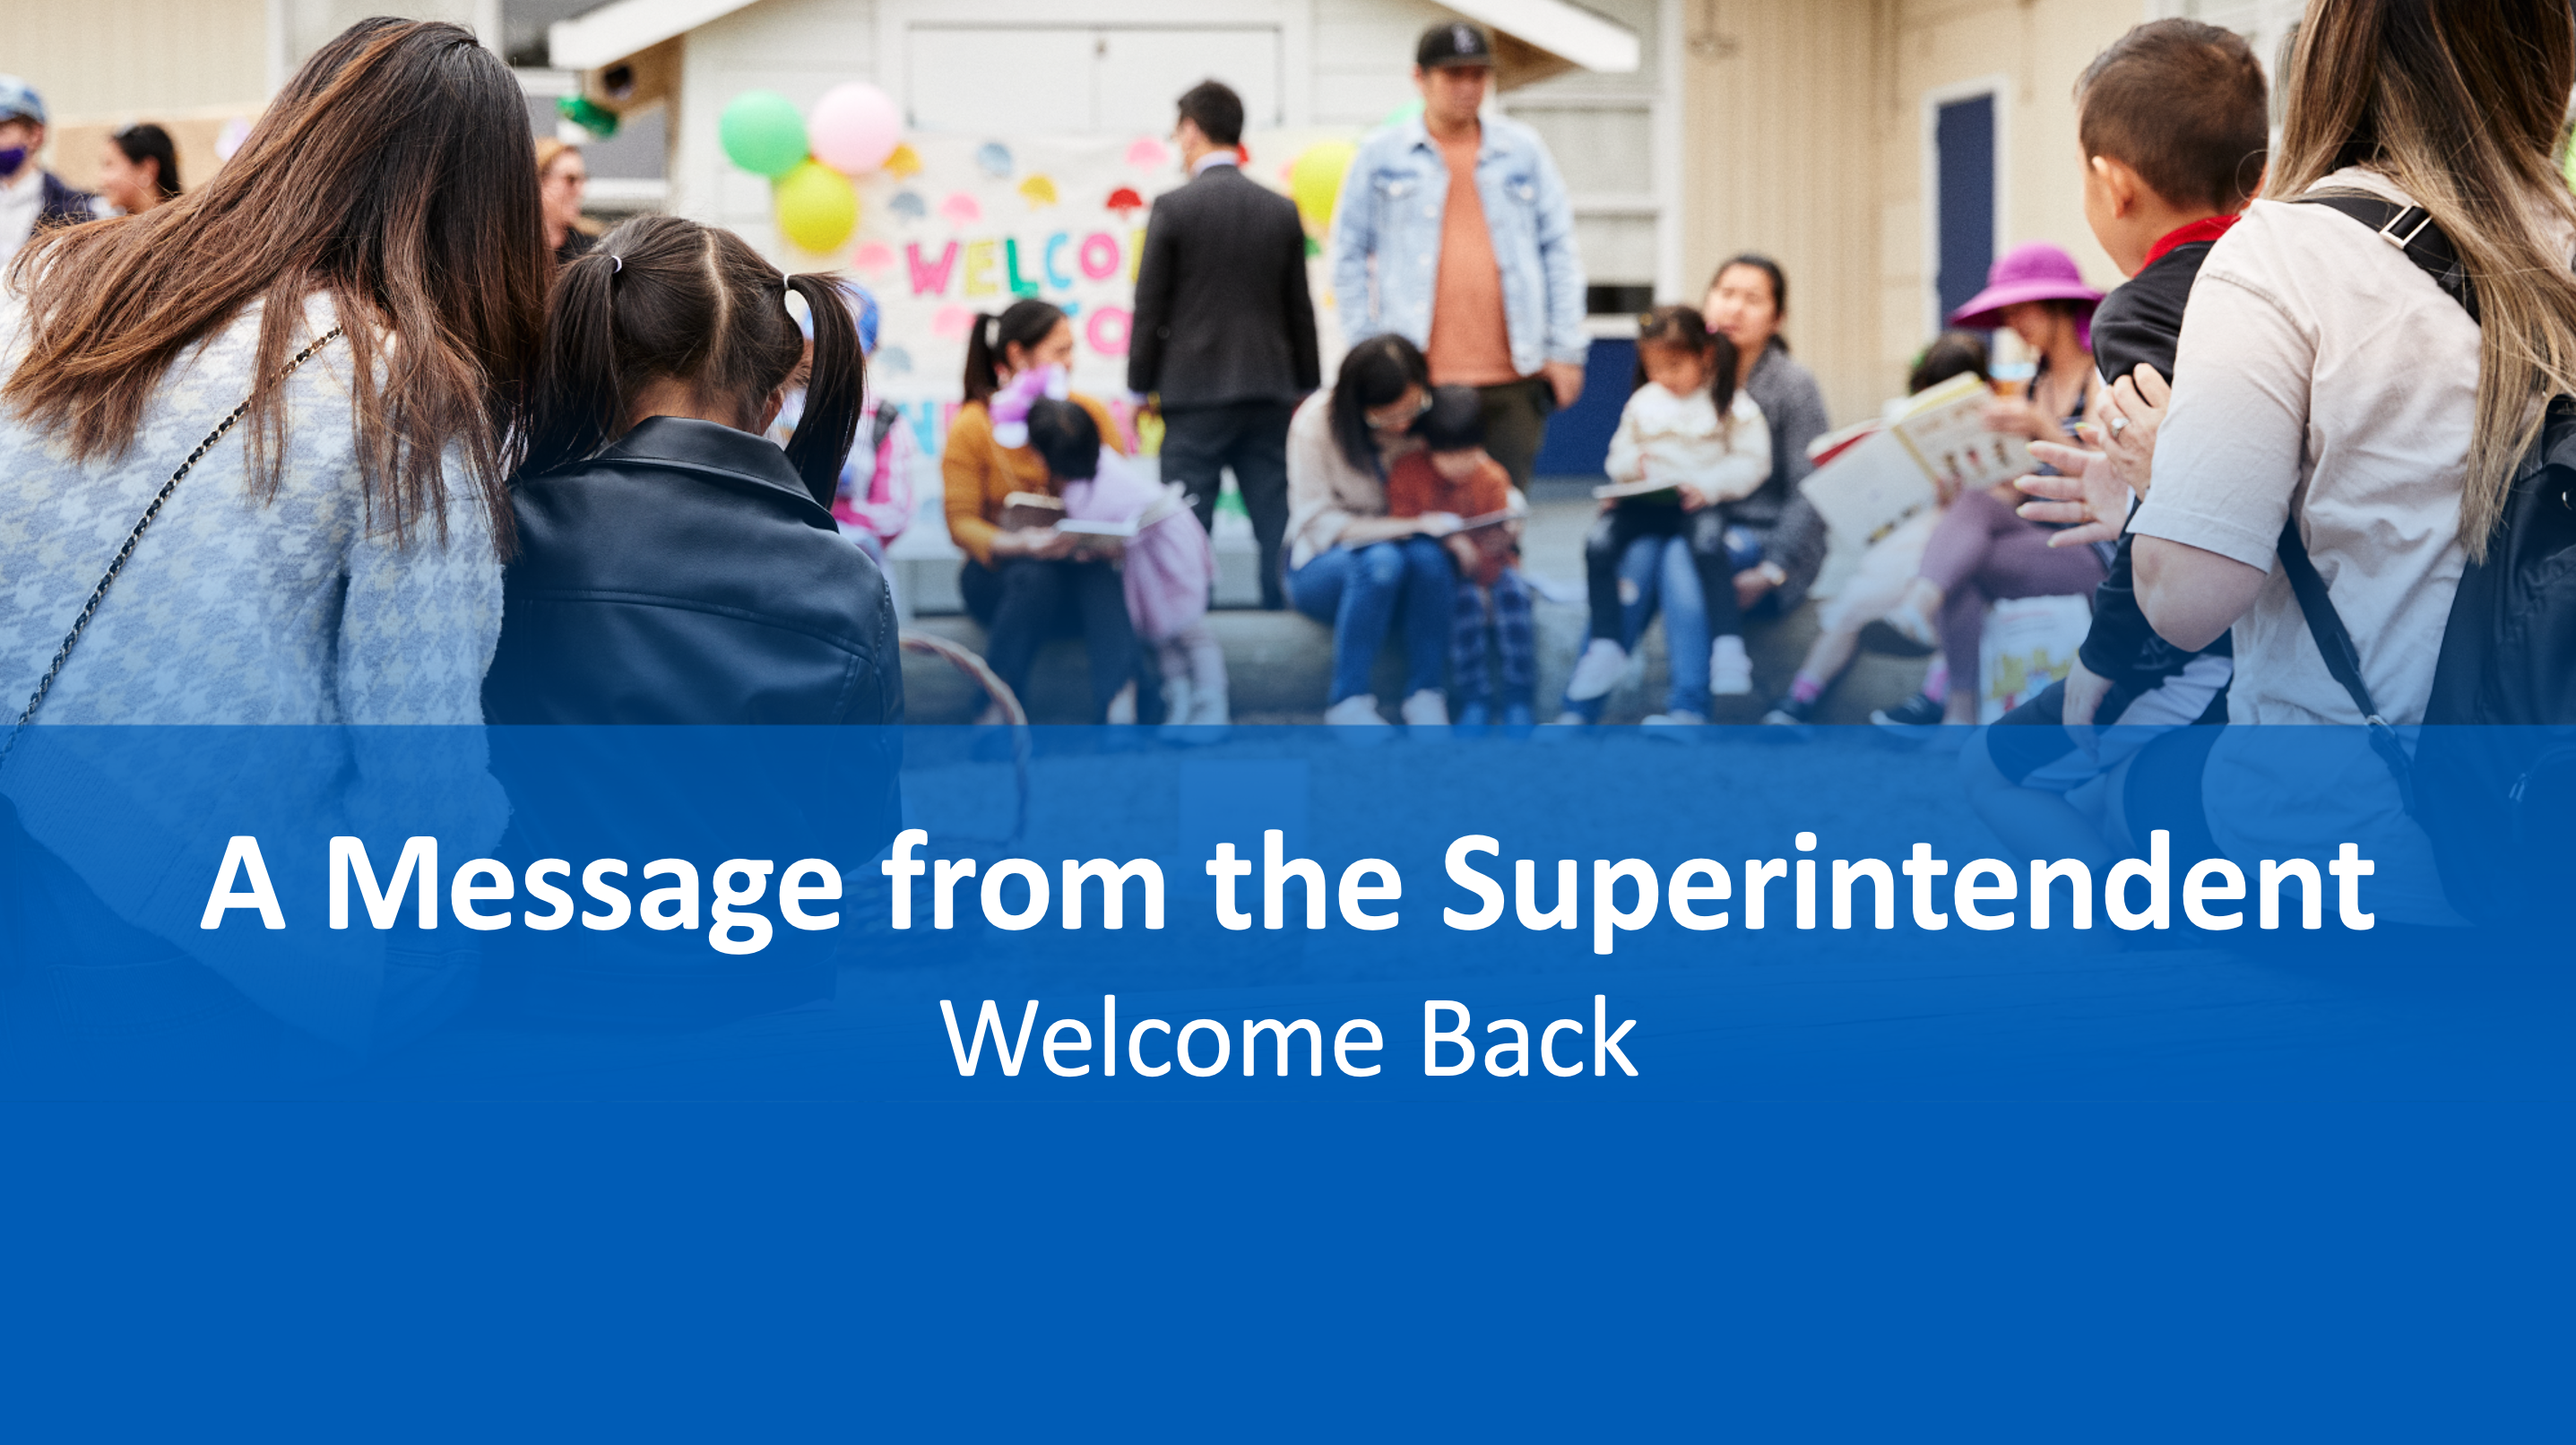 A Message from the Superintendent - Welcome Back